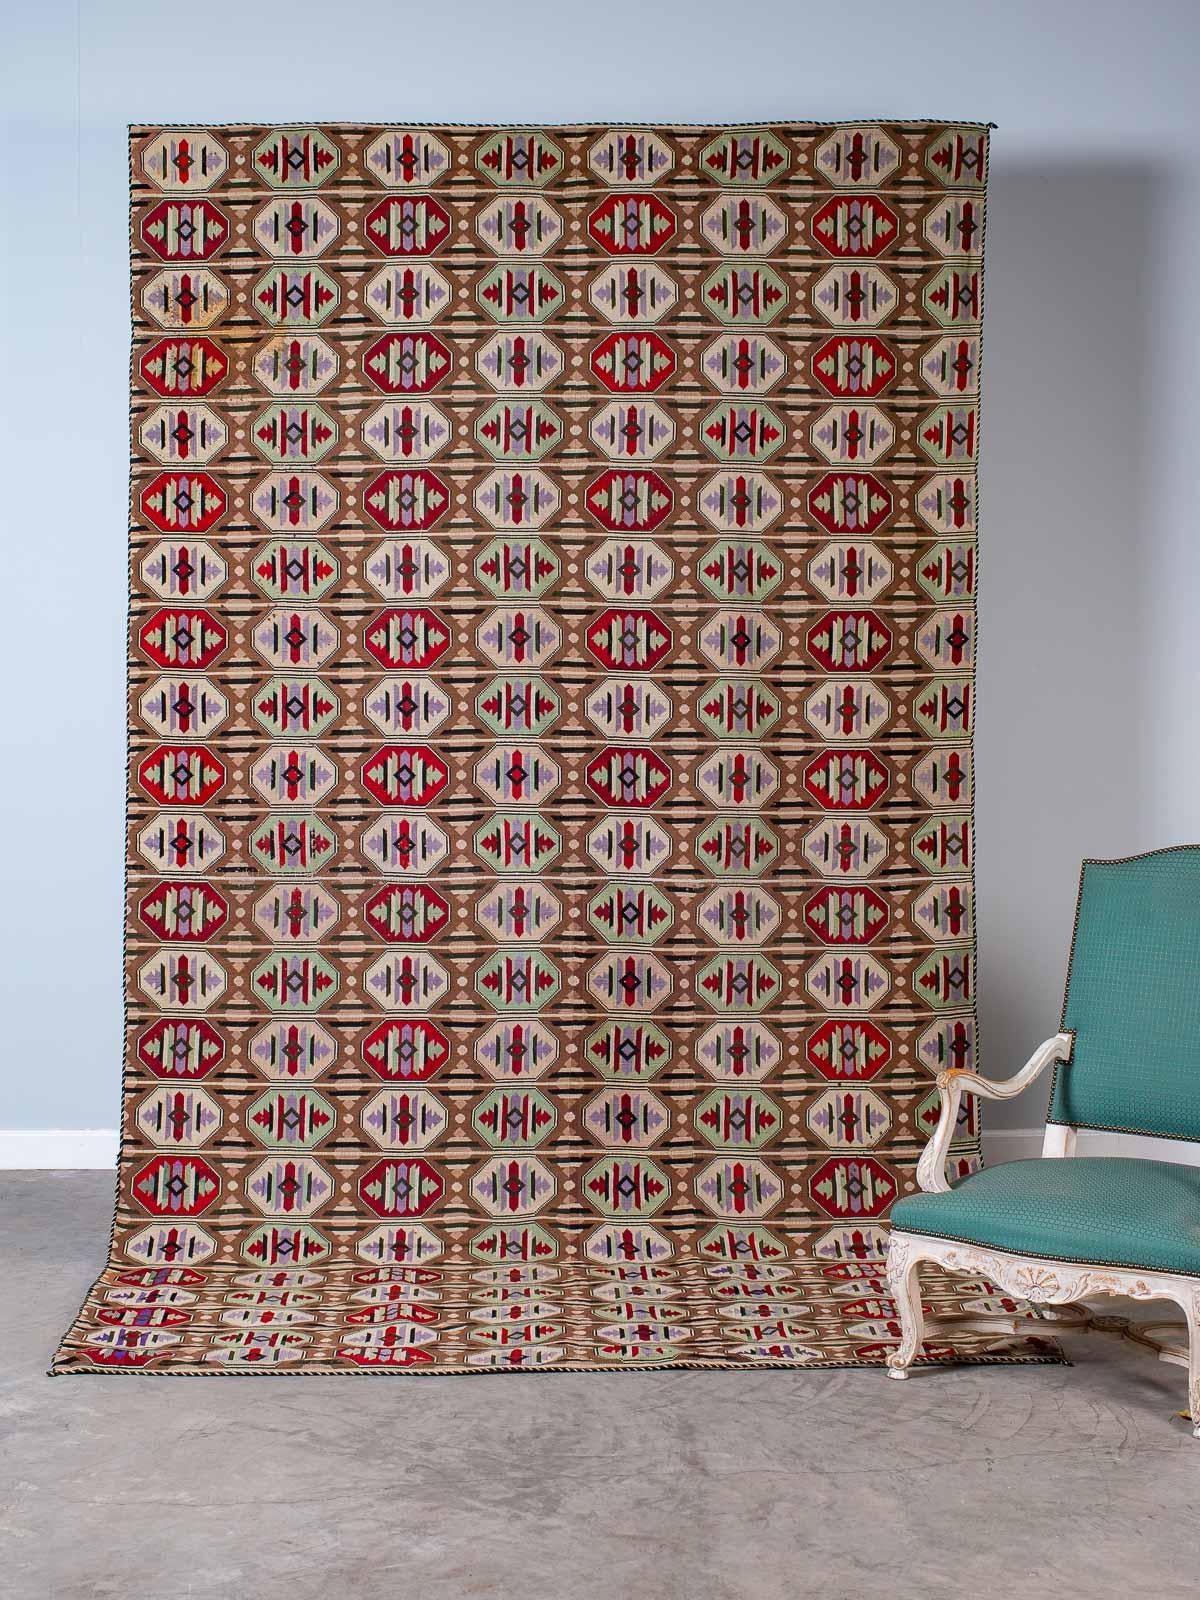 This enormous vintage Art Deco woven textile is from Prague in the Czech Republic, circa 1930. The combination of geometric designs with a powerful color palette gives this piece of woven art its visual impact. This textile is not a rug and was